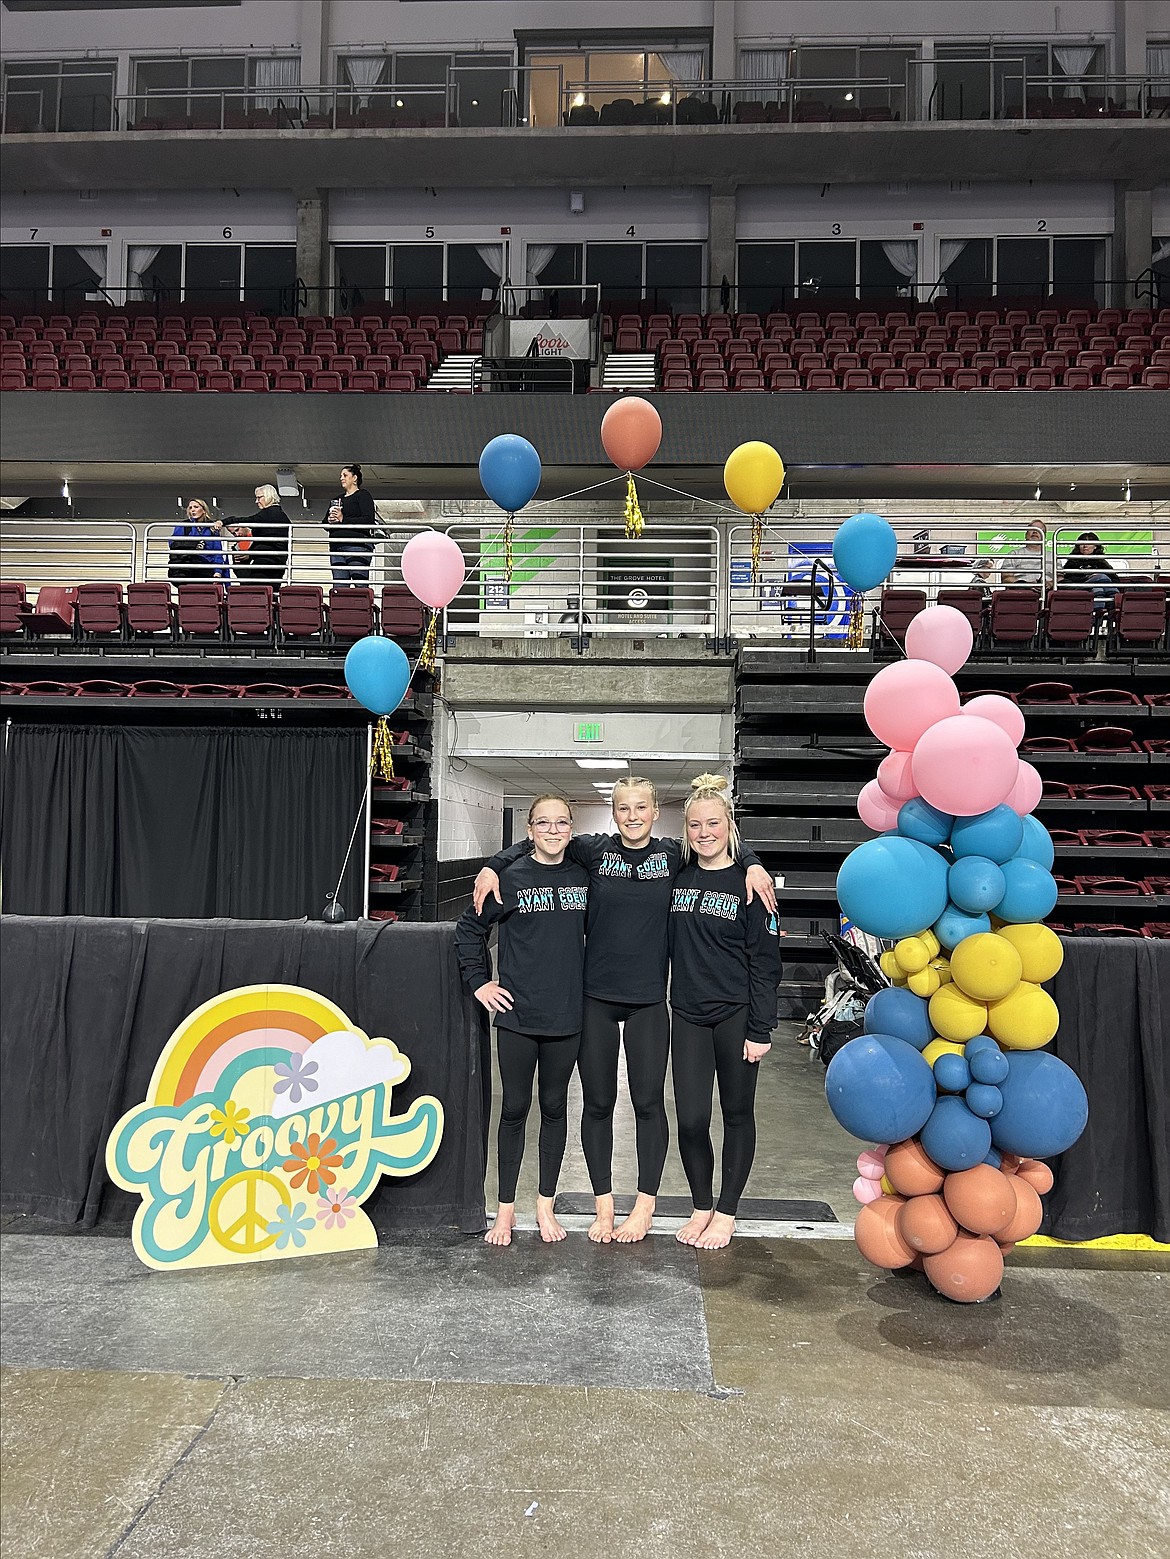 Courtesy photo
Avant Coeur Gymnastics Xcel Golds at the recent Region 2 Regional Championships in Boise. From left are Lily Kramer, Liliana Olind and Allie Scott.